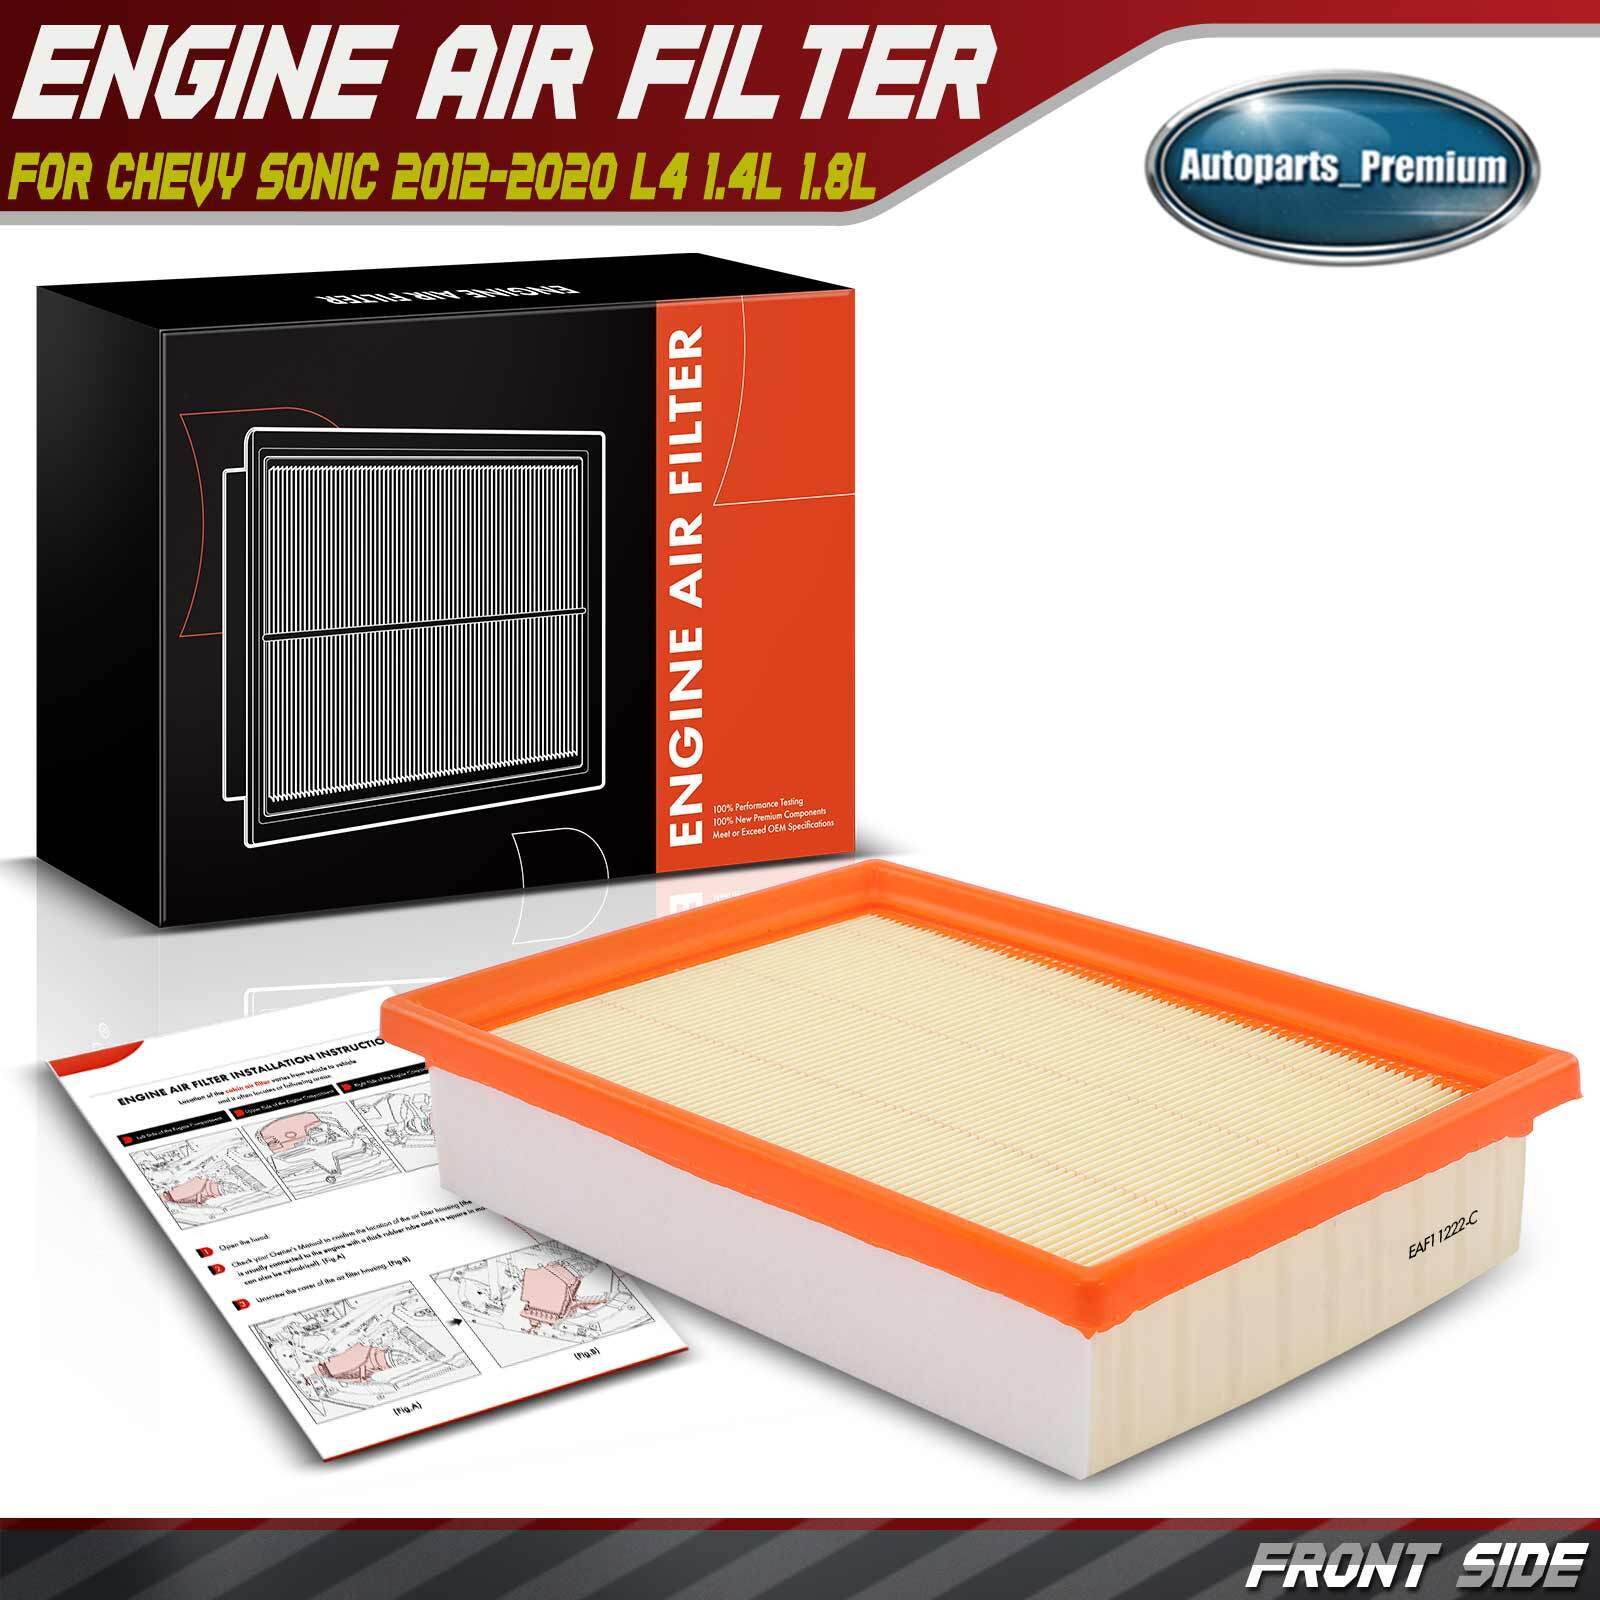 Engine Air Filter for Chevrolet Sonic 2012 2013 2014 2015 2016-2020 L4 1.4L 1.8L